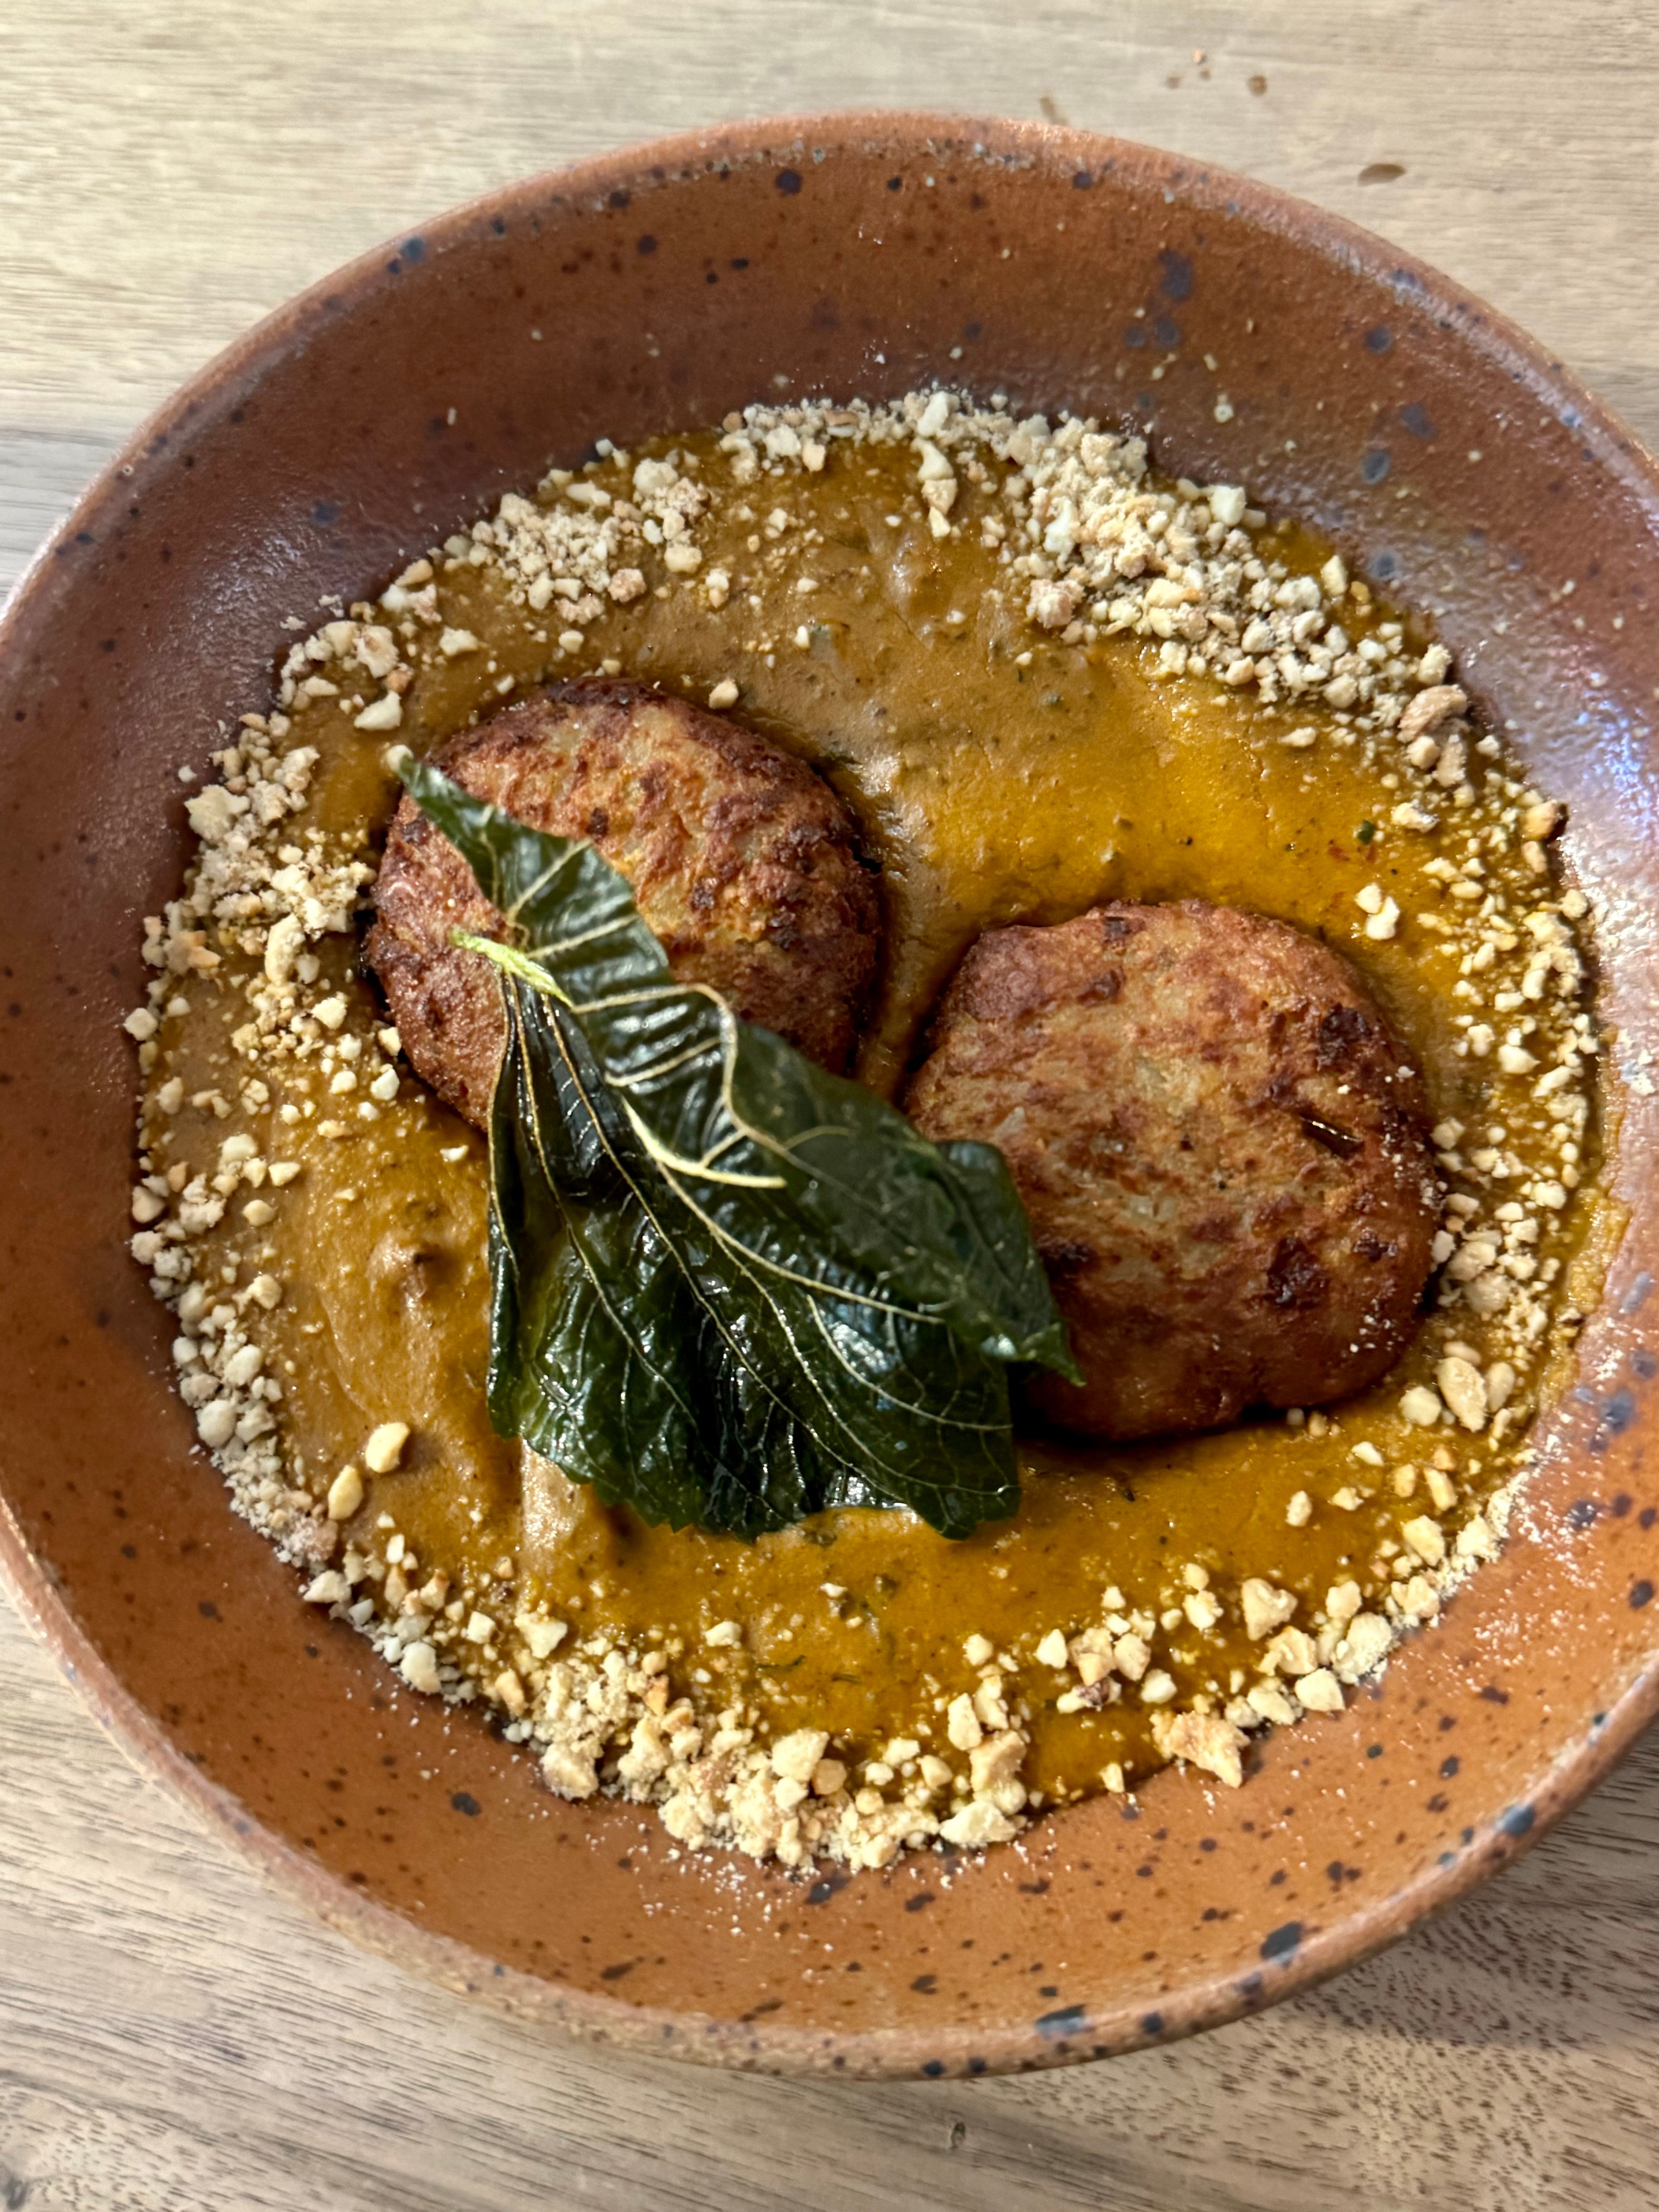 A bowl of food with two croquettes, a brown-orange cashew sauce, crushed nuts, and a leaf garnish.